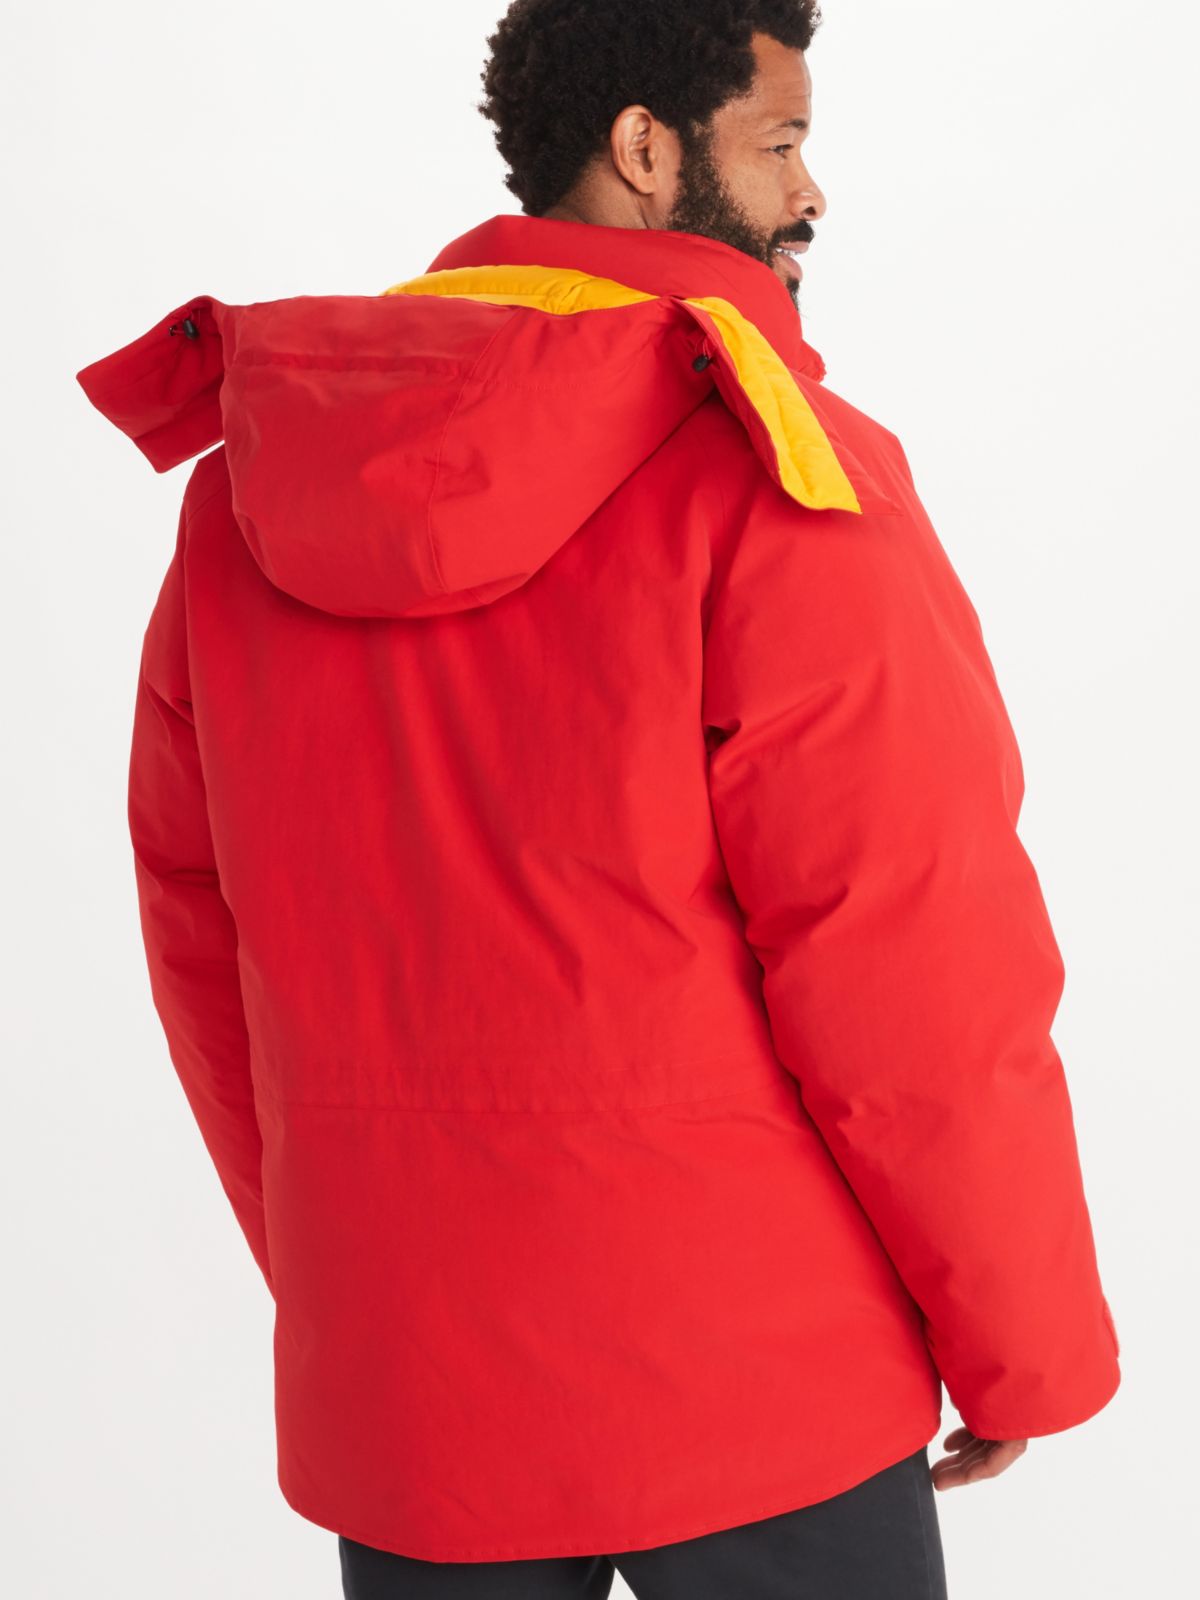 Man in red parka